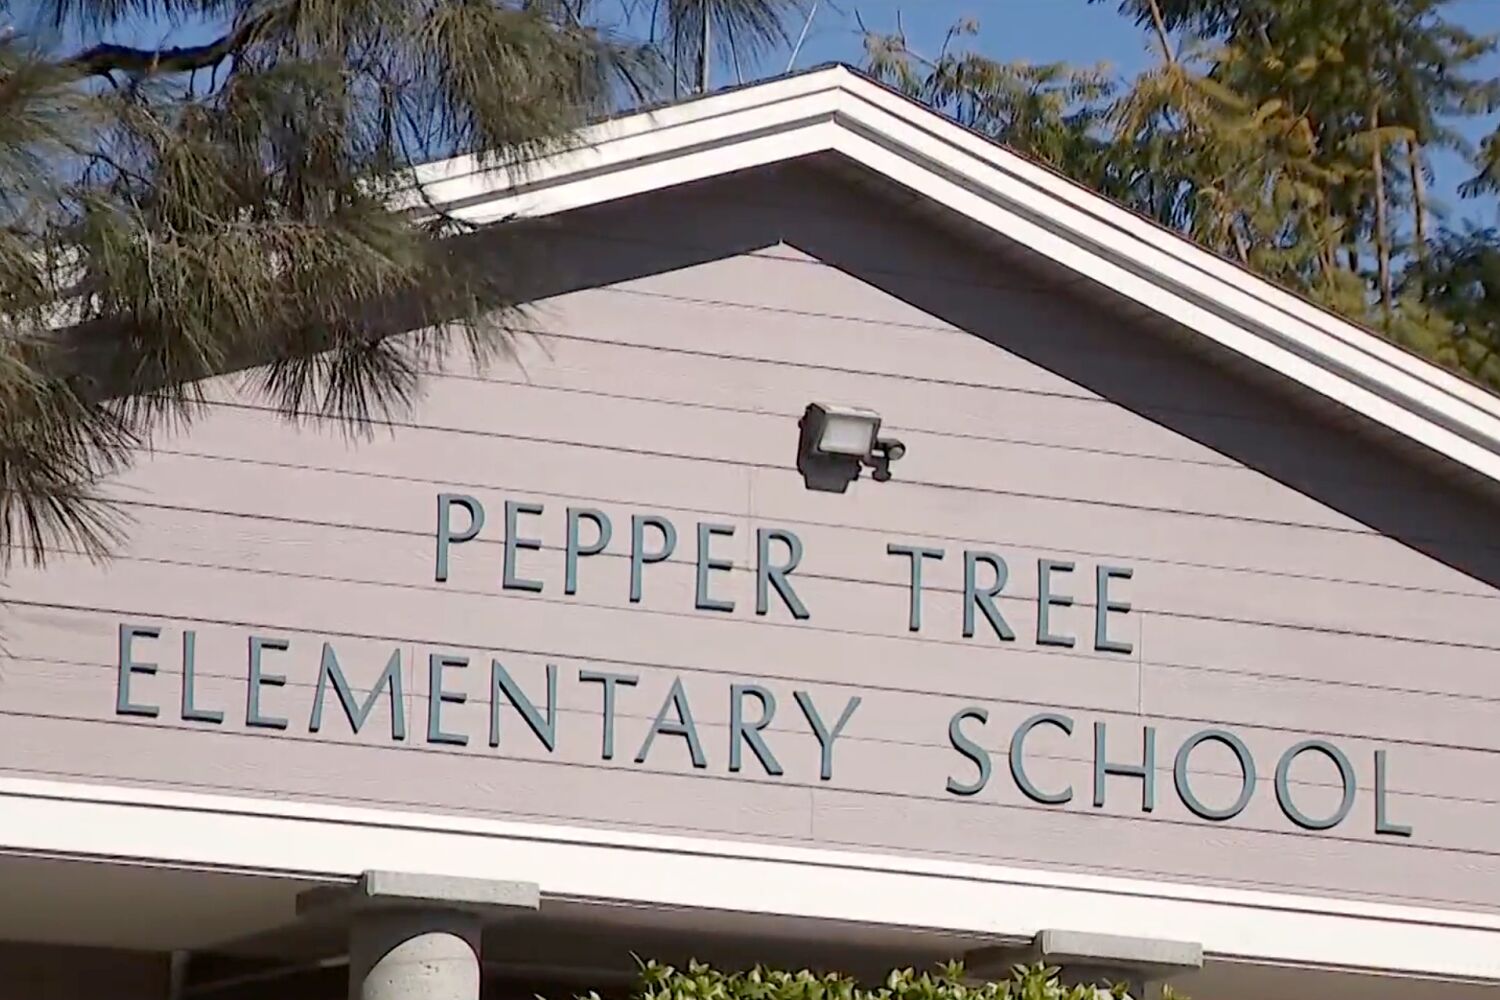 Black students at Upland elementary school reportedly bullied with racist drawings